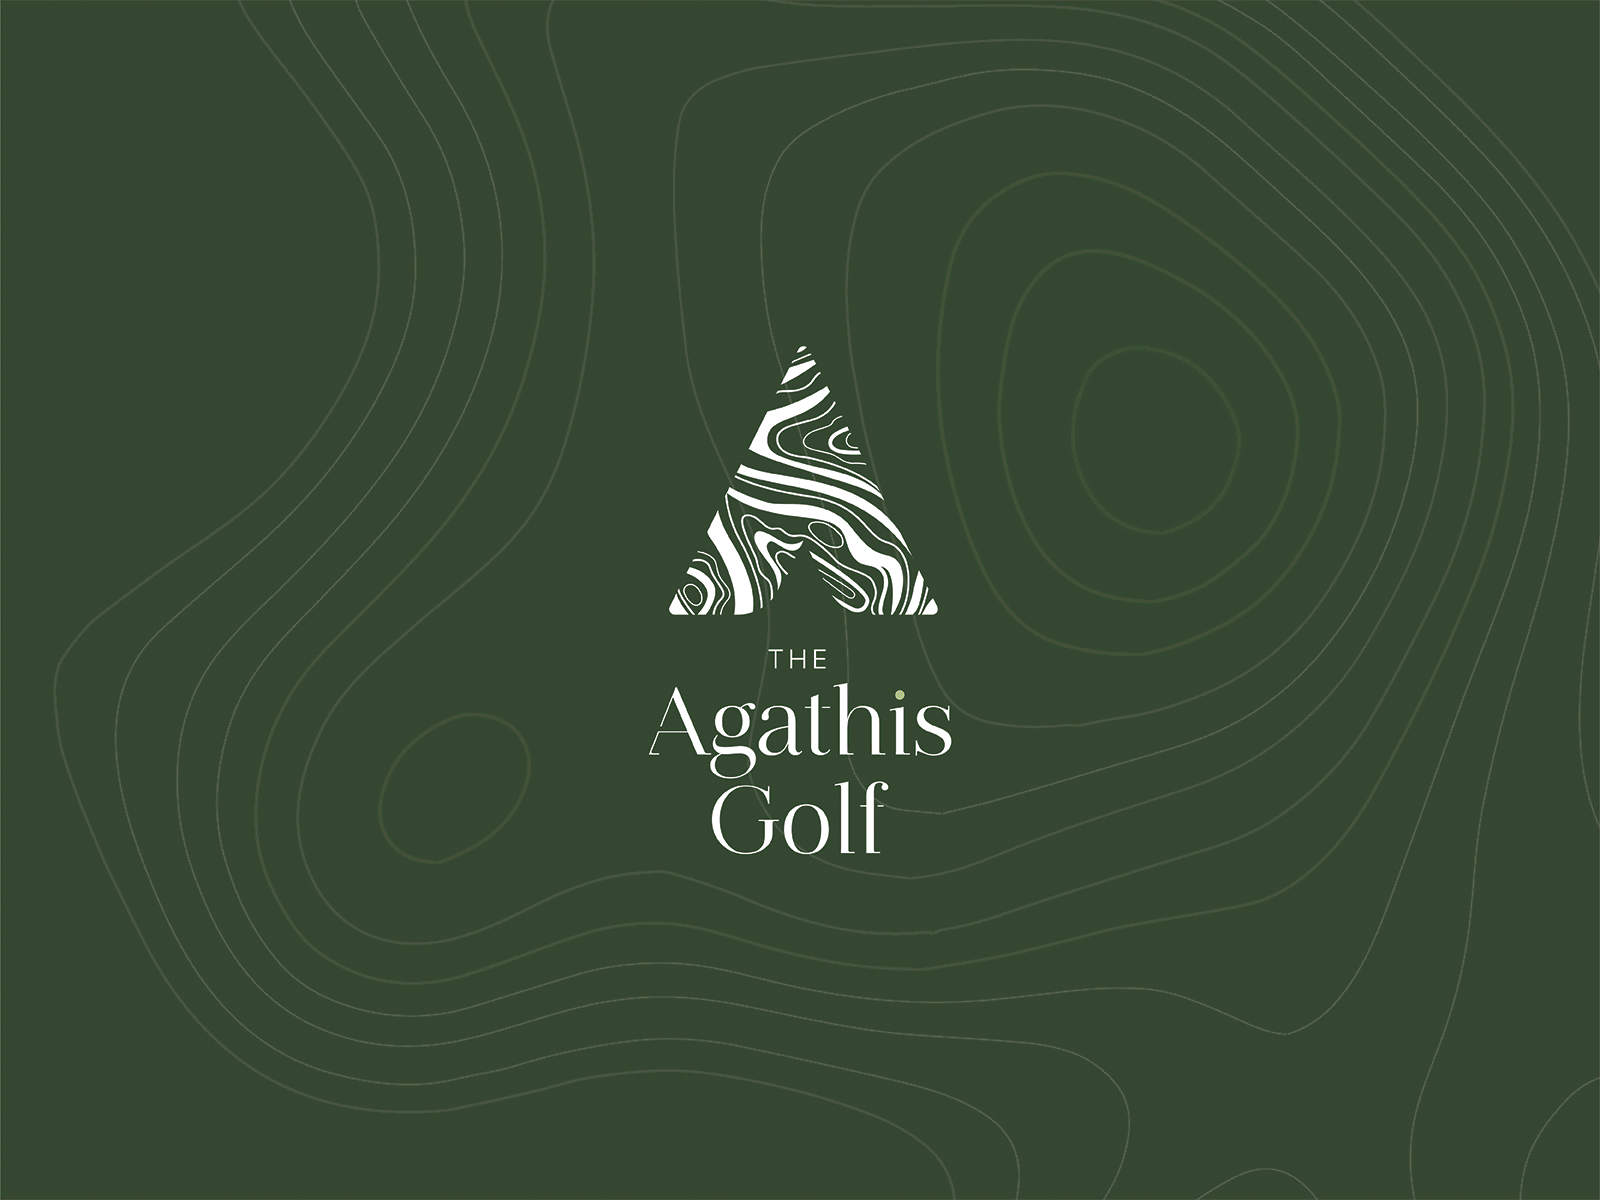 The Agathis Golf - Visual and Brand Identity brand identity branding colonial editorial golf course high end residence logo logogram logotype modern modern lifestyle nature topography visual identity